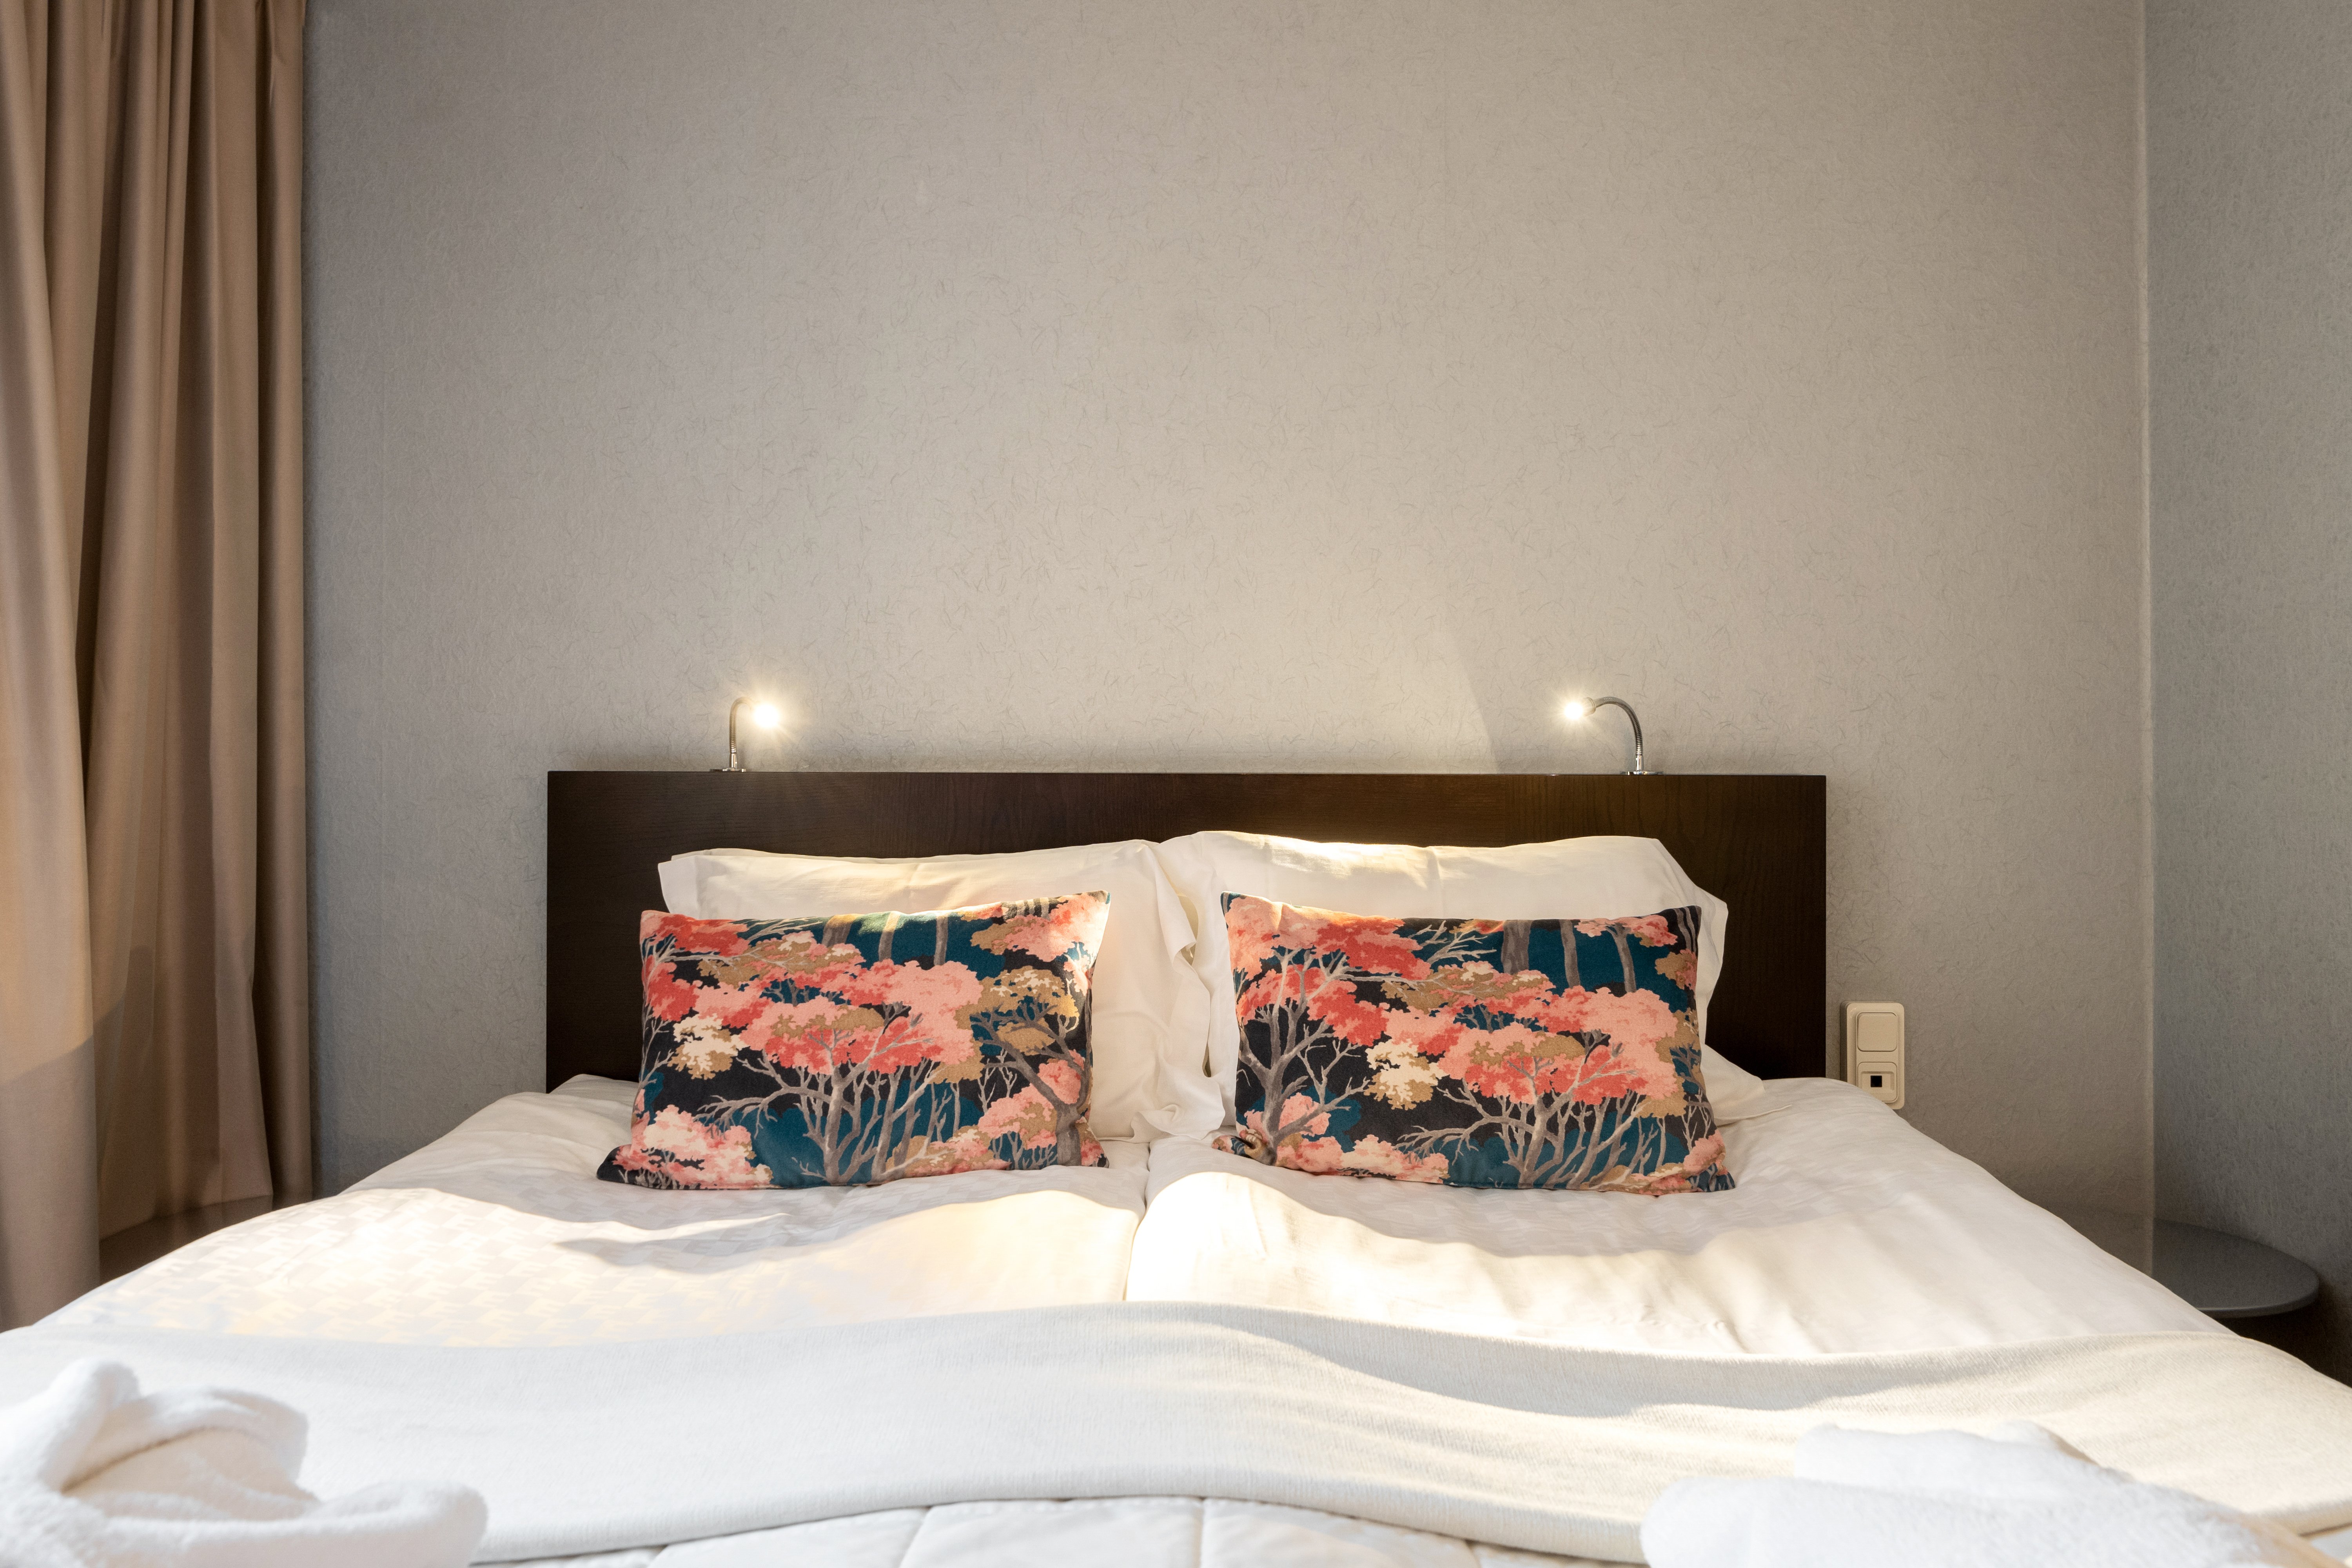 Hotel room with double bed with floral pillows and lamps